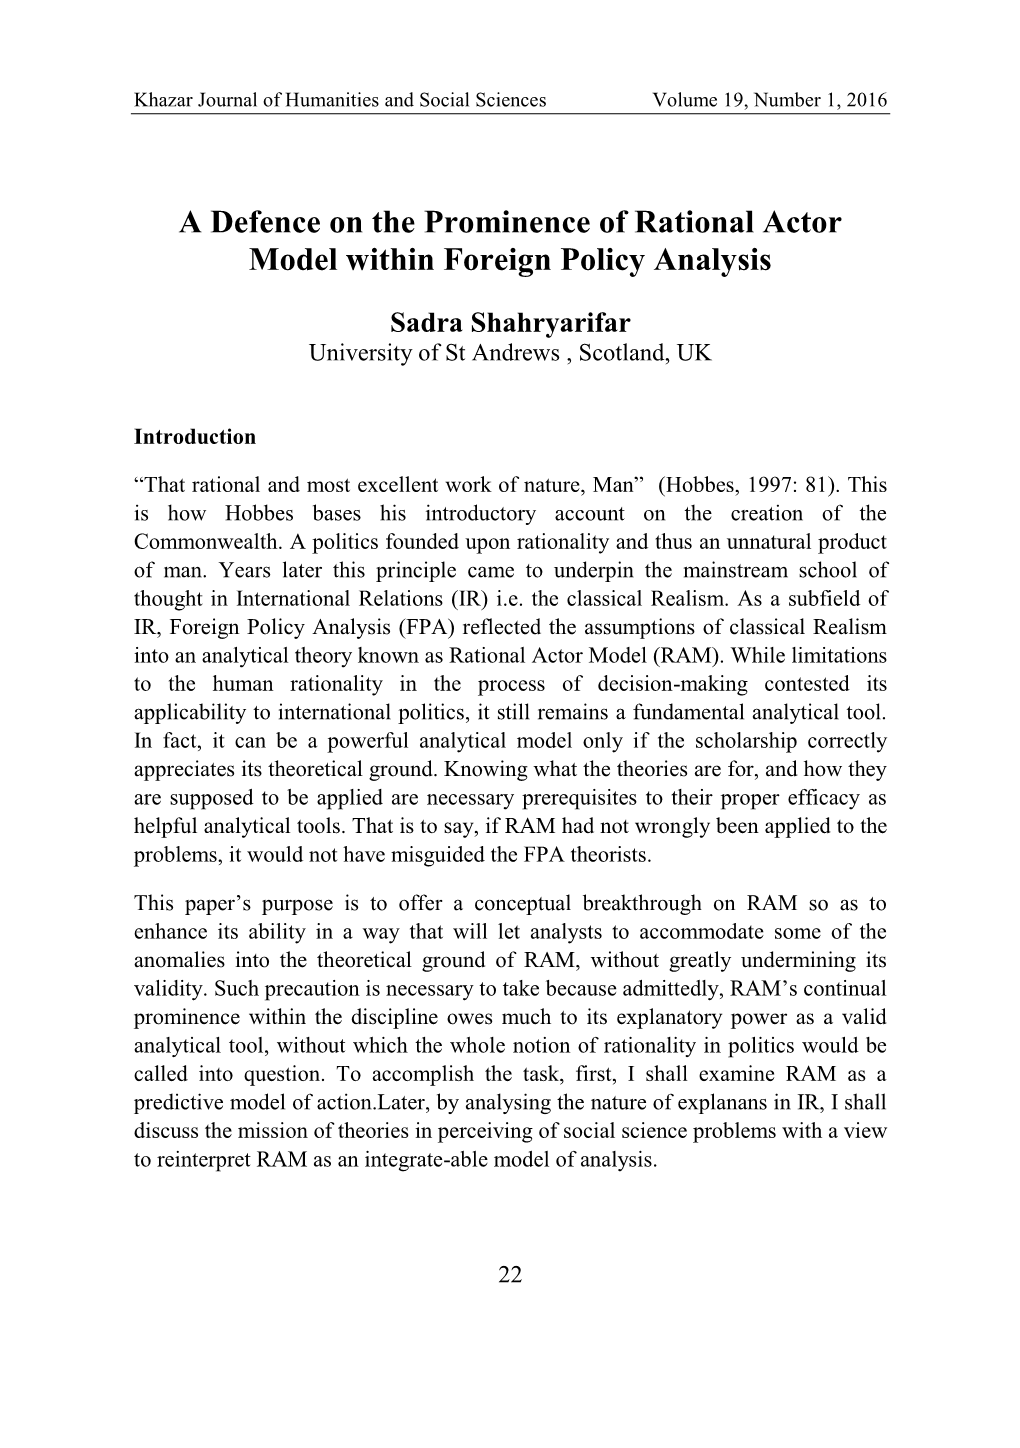 A Defence on the Prominence of Rational Actor Model Within Foreign Policy Analysis